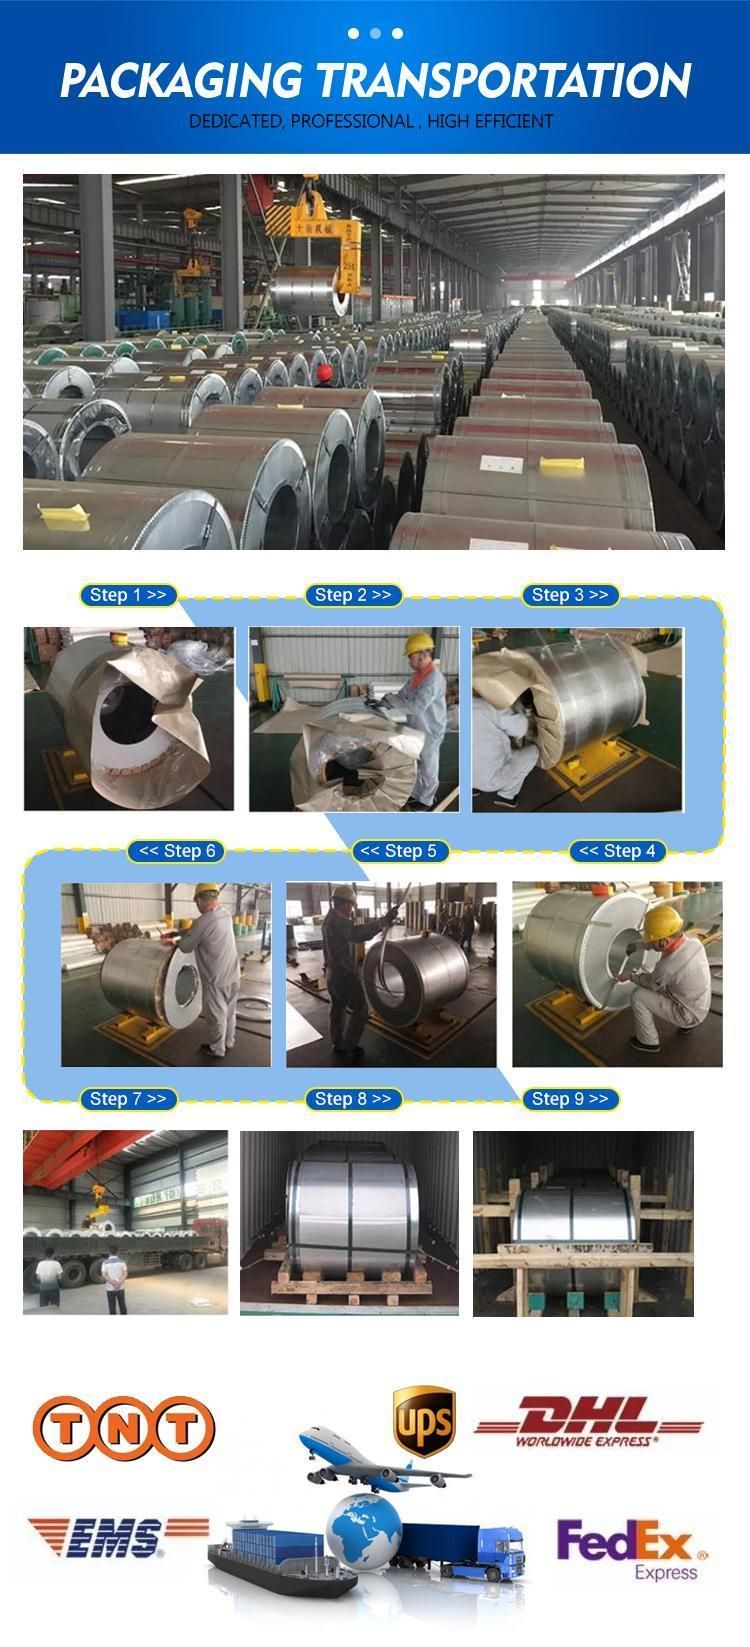 China Supplier Dx51d Ral 3003/3005/6005/8017/5015/9016 0.12/0.20/0.30/0.50mm Z30 Z275 Pre-Painted Galvanized Steel Coil Color Coated Steel Gi/Gl/PPGL/PPGI